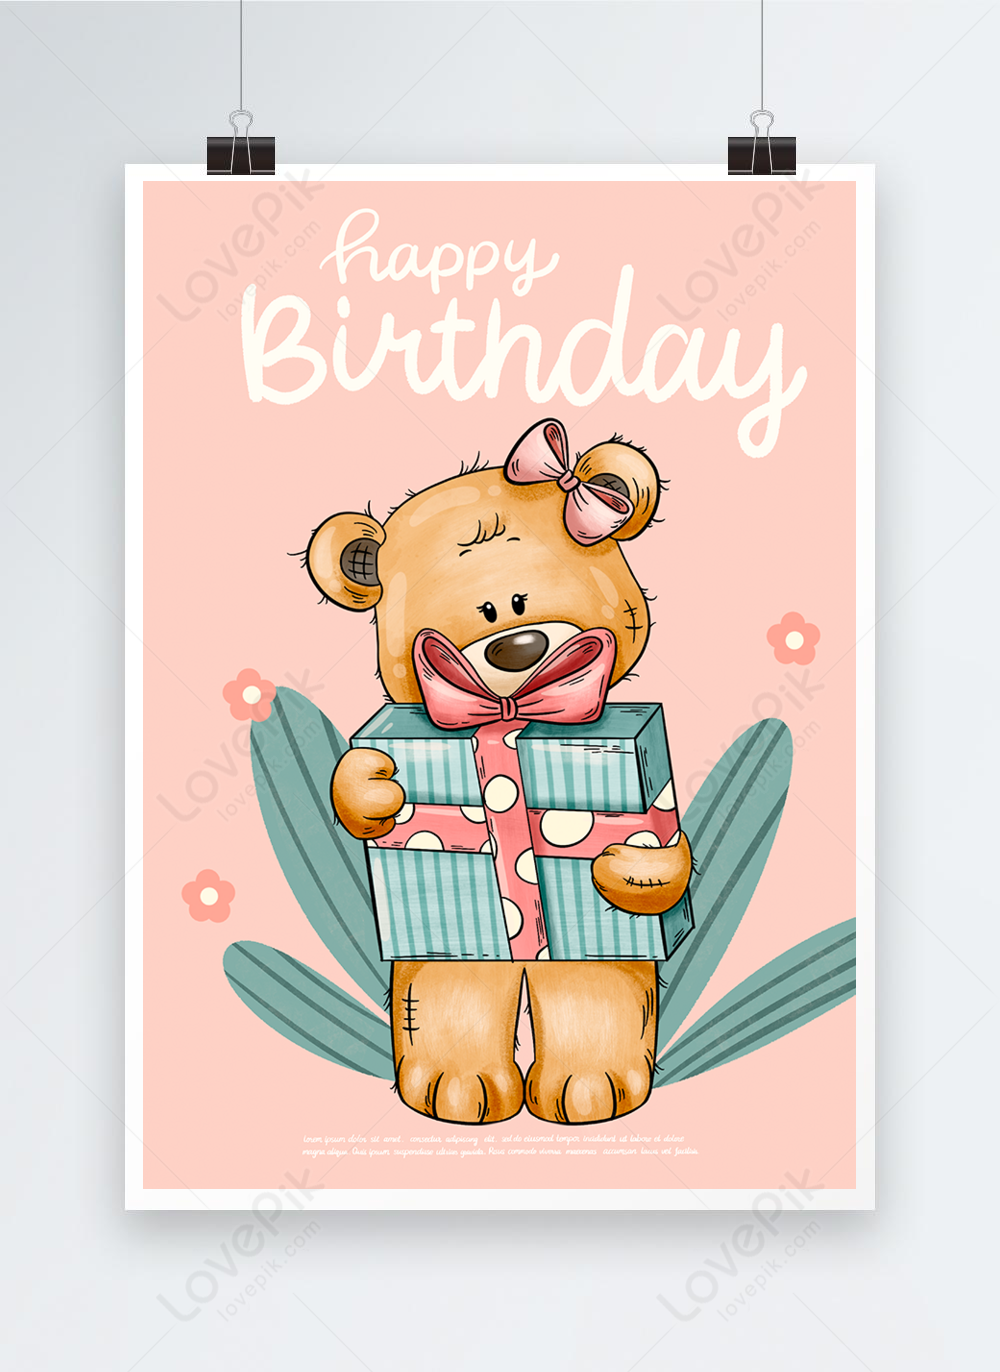 Hand drawn cute birthday teddy bear poster template image_picture free ...